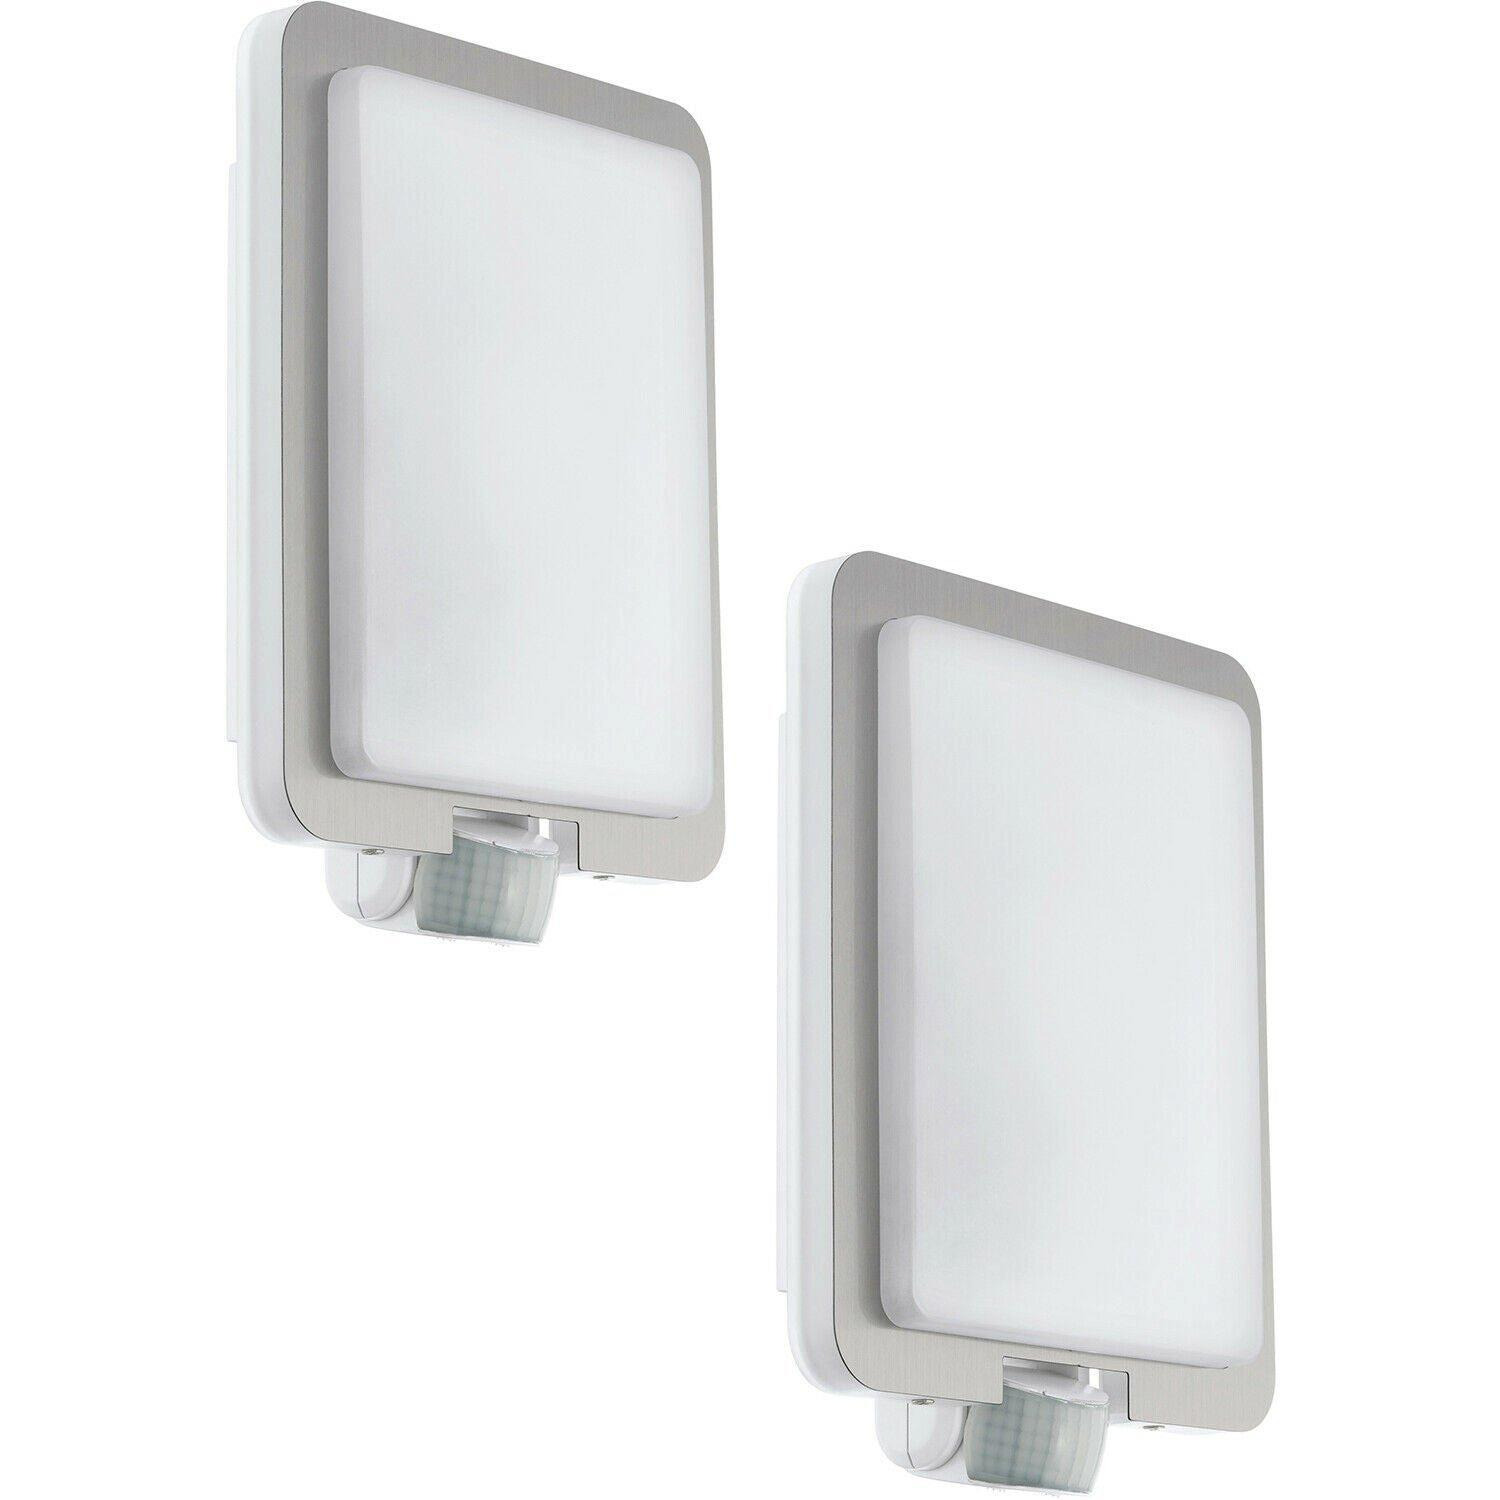 2 PACK IP44 Outdoor Wall Light & PIR Sensor Stainless Steel Square 28W E27 - image 1